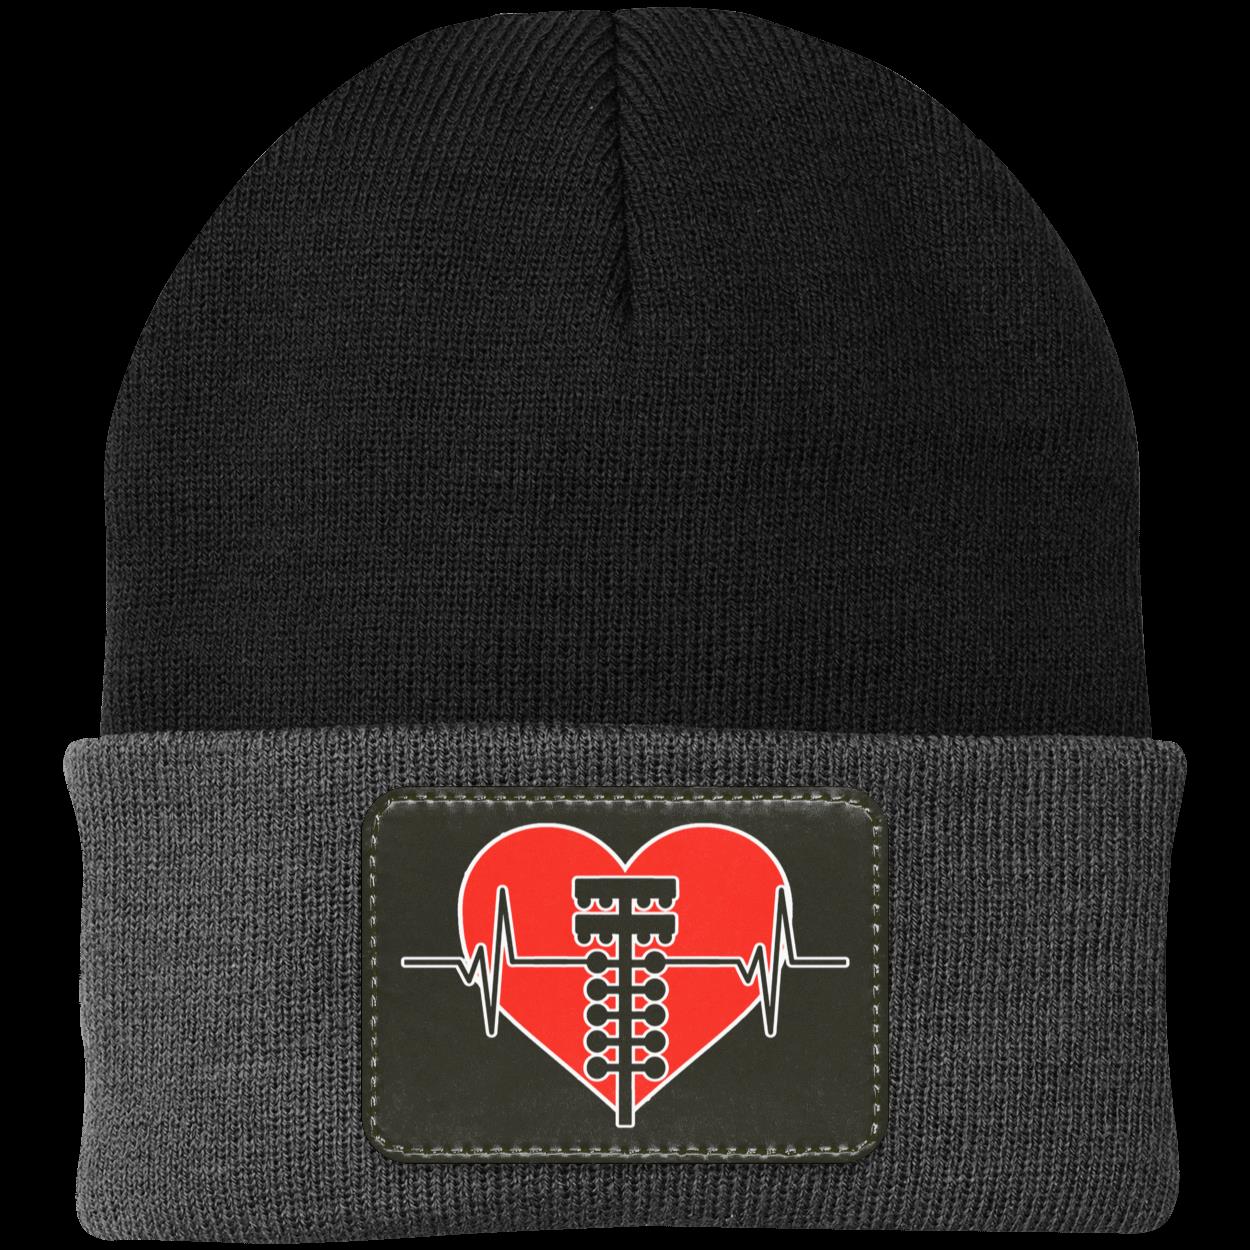 Drag Racing Heartbeat Patched Knit Cap V2